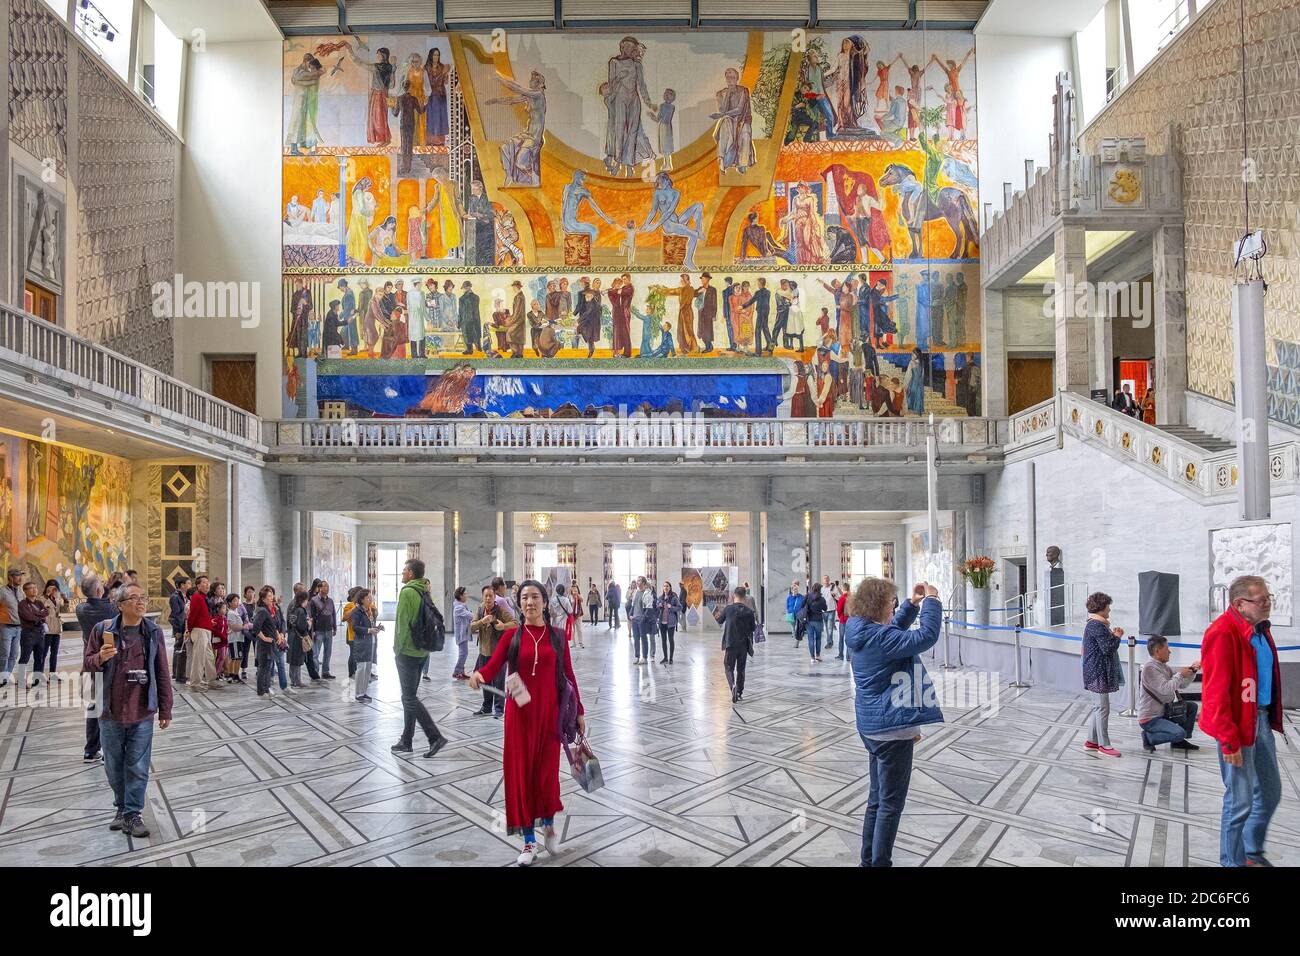 Oslo, Ostlandet / Norway - 2019/08/30: Oslo City Hall historic building - Radhuset - with wall painting  decoration by Henrik Sorensen in Pipervika qu Stock Photo